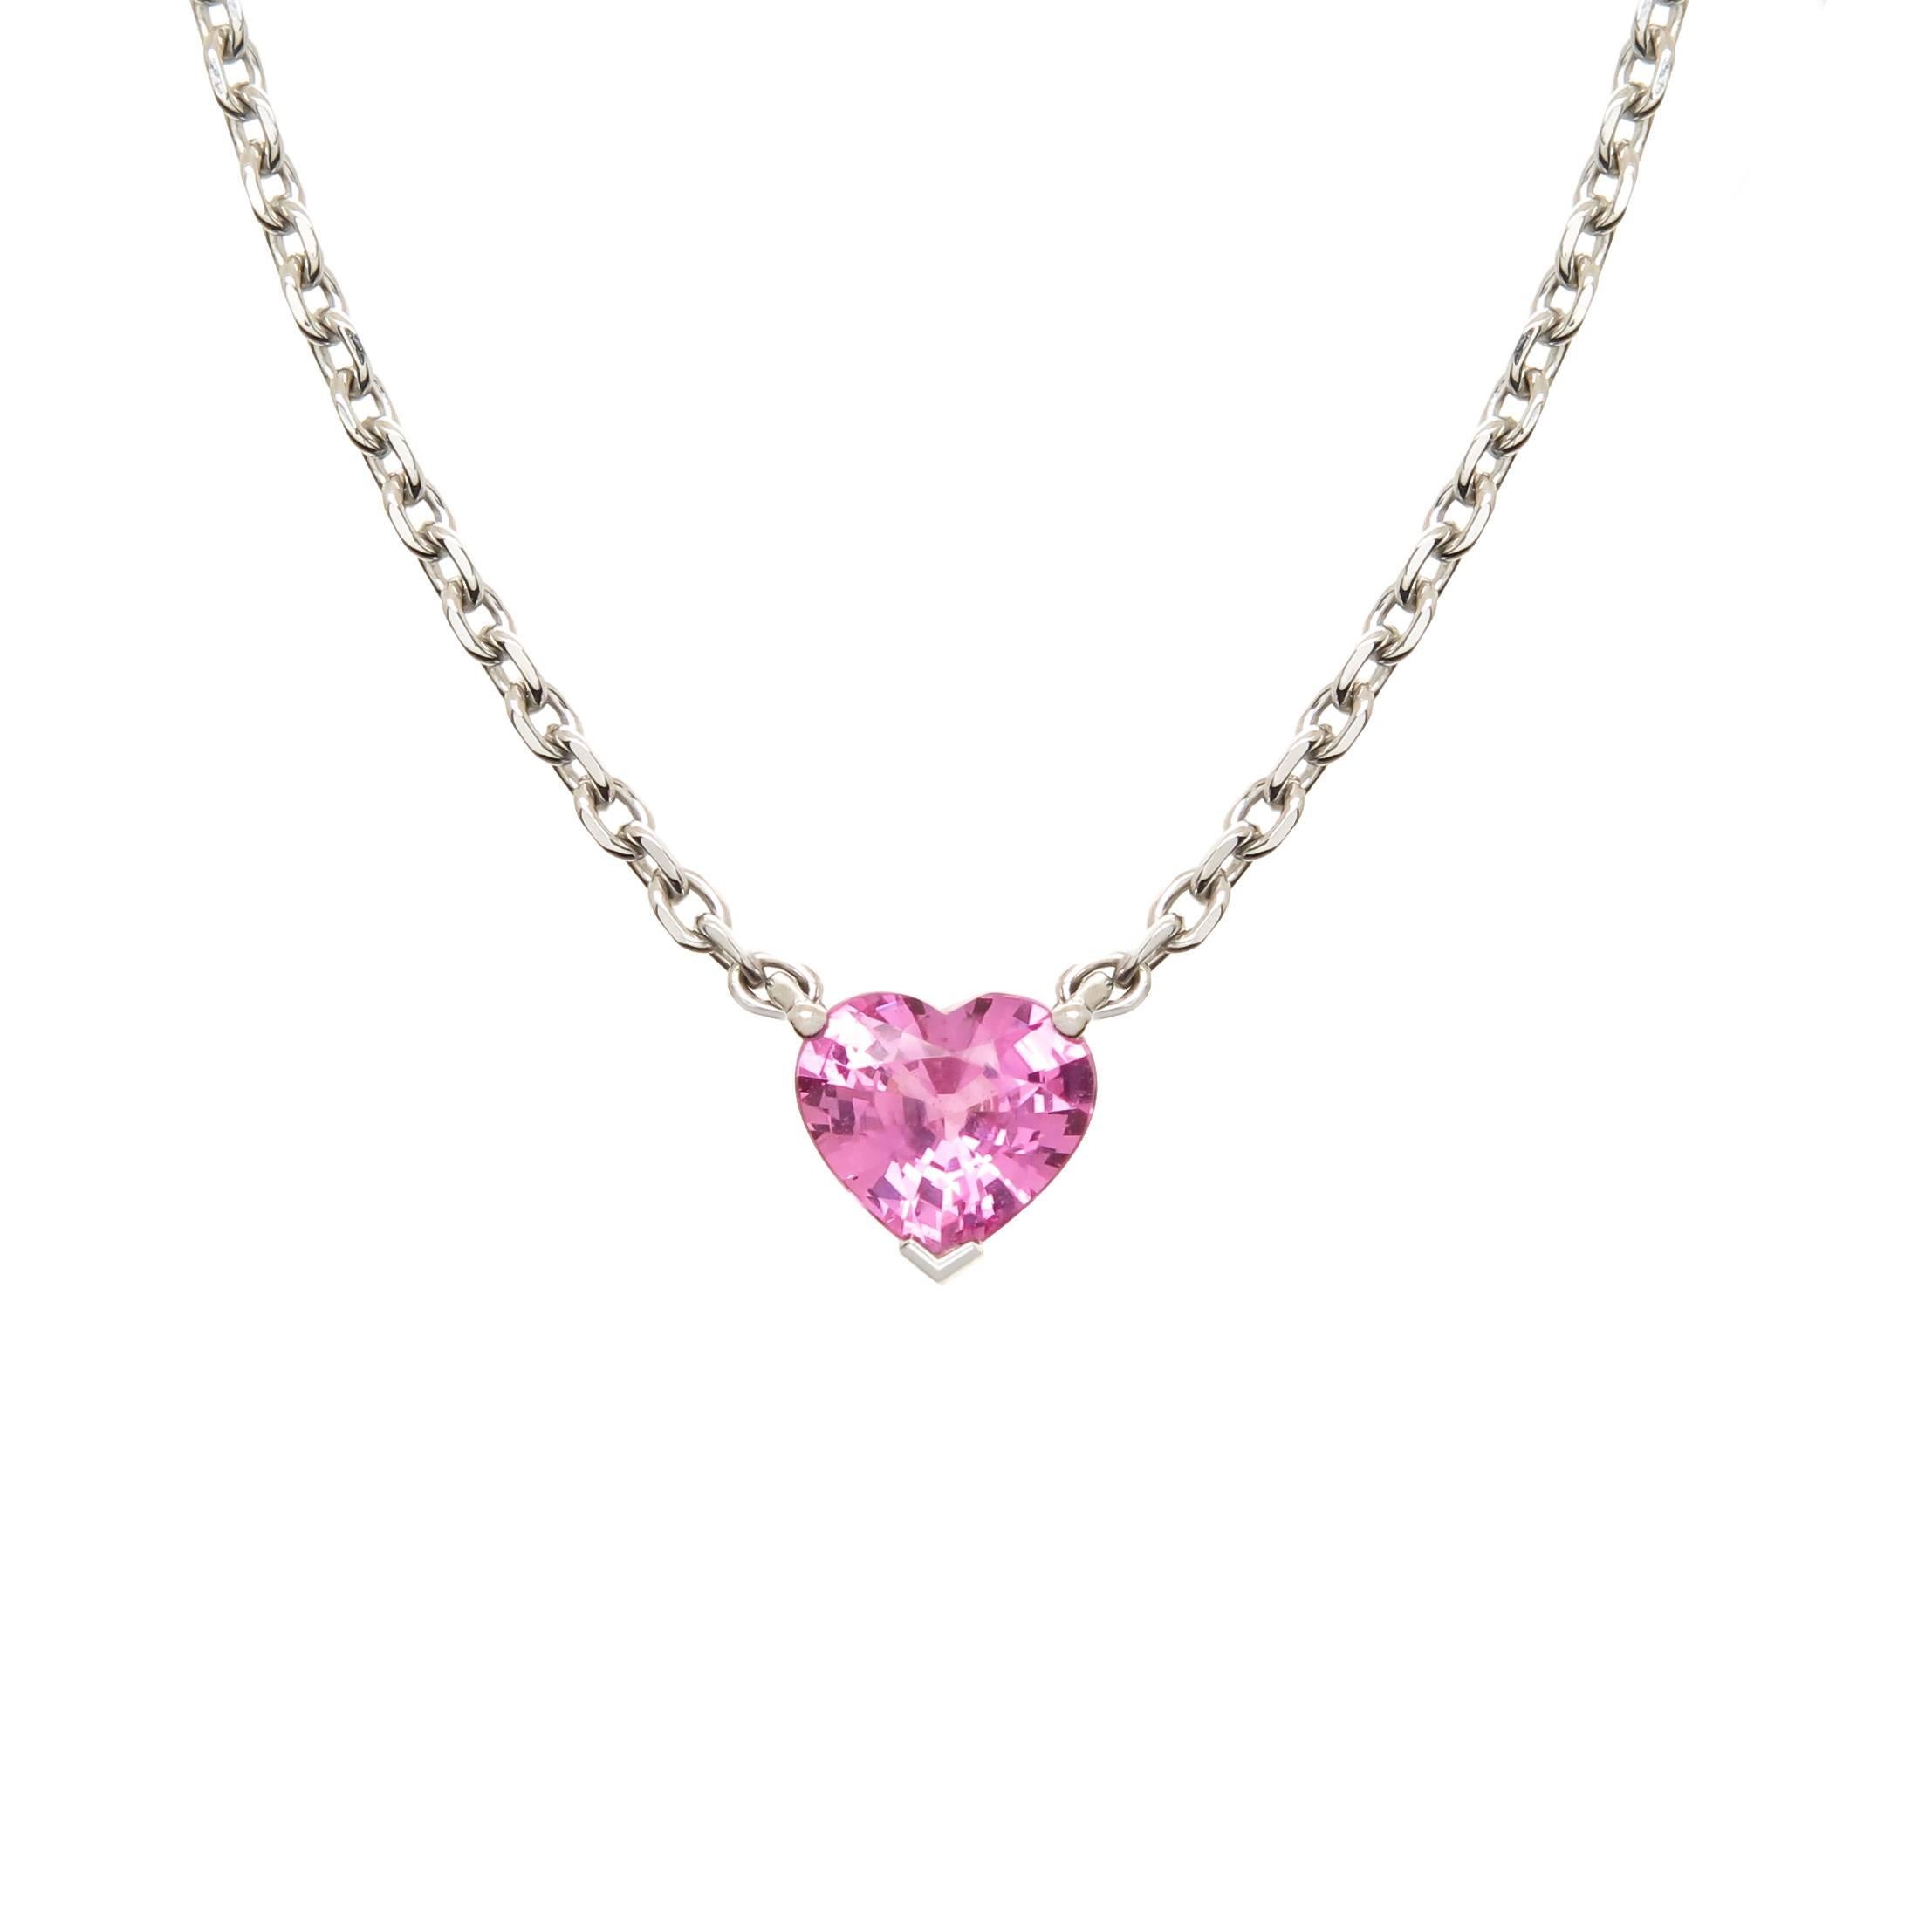 Cartier White Gold and Pink Heart Shape Sapphire Pendant Necklace